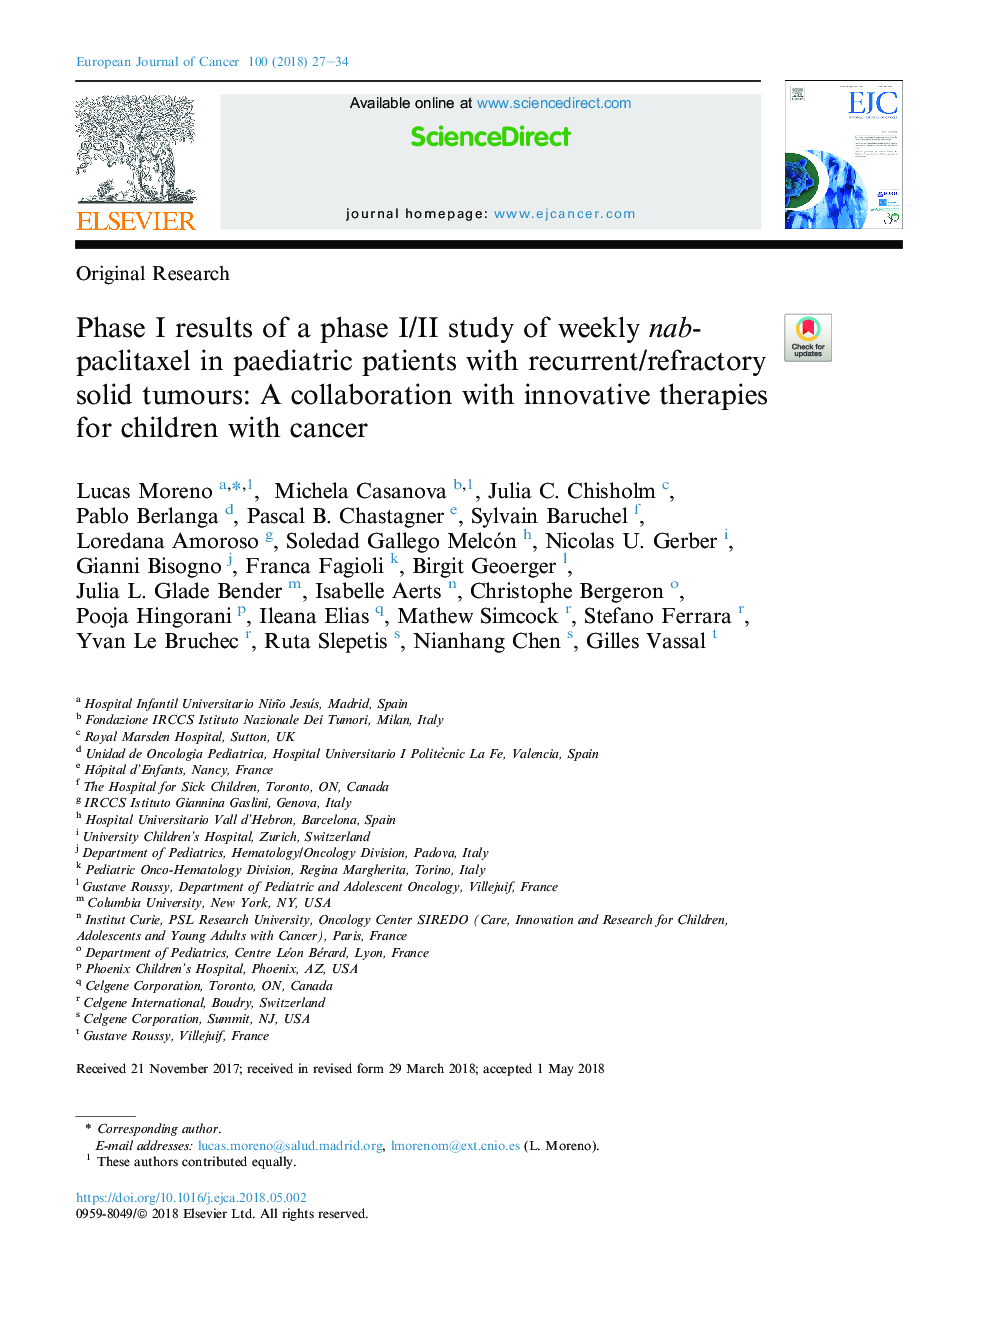 Phase I results of a phase I/II study of weekly nab-paclitaxel in paediatric patients with recurrent/refractory solid tumours: A collaboration with innovative therapies for children with cancer